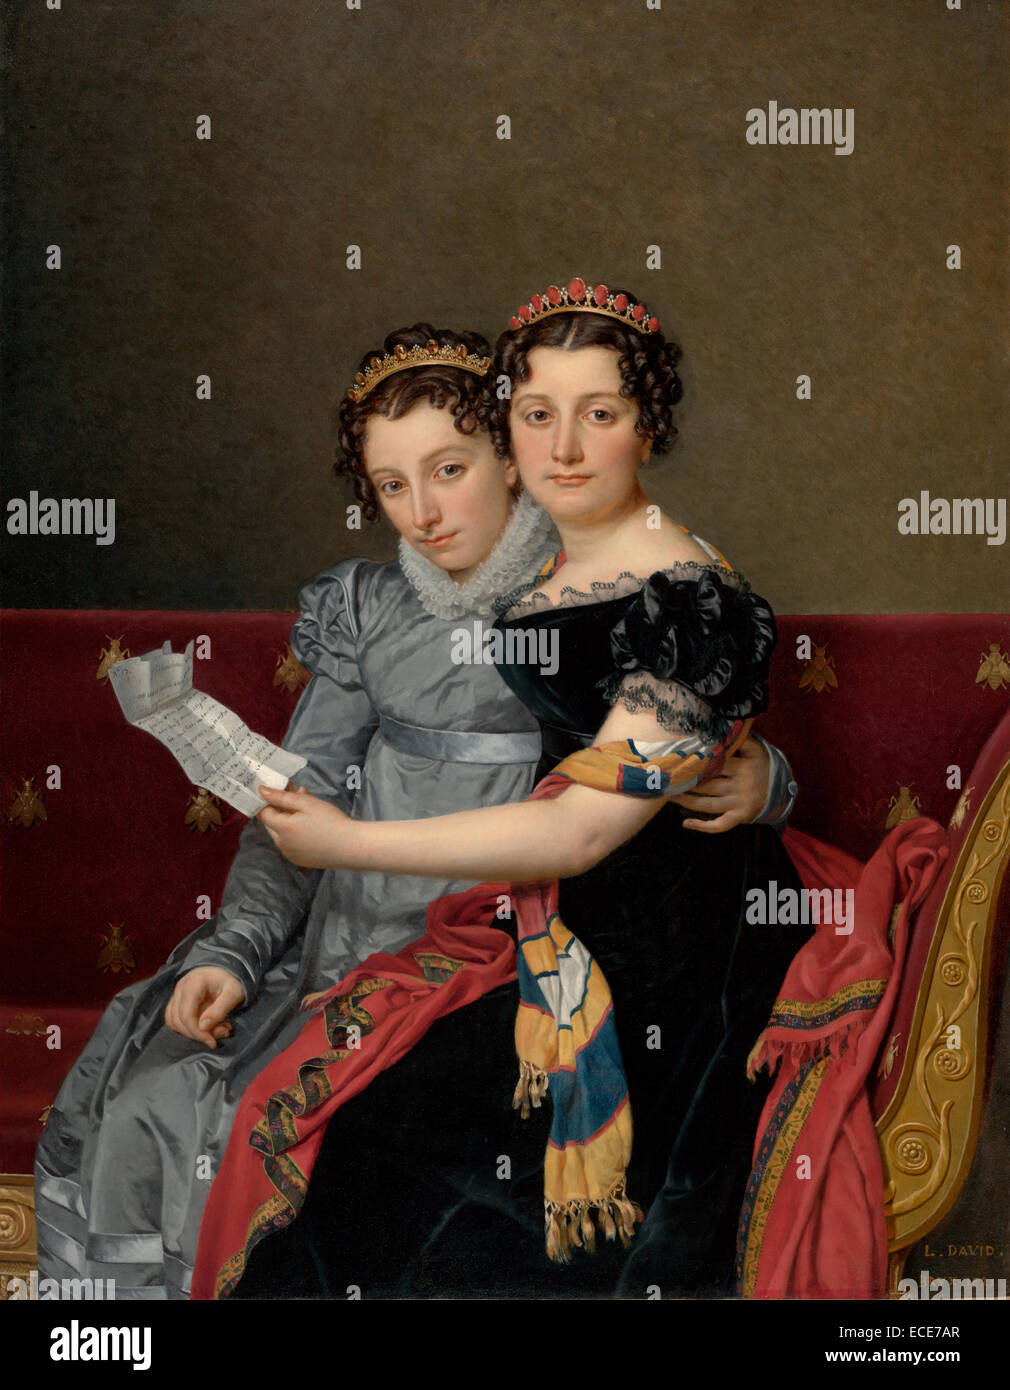 Portrait of the Sisters Zénaïde and Charlotte Bonaparte by Jacques-Louis David, French, 1821; Oil on canvas; Unframed: 129.5 x 100.6 cm (51 x 39 5/8 in.) Stock Photo